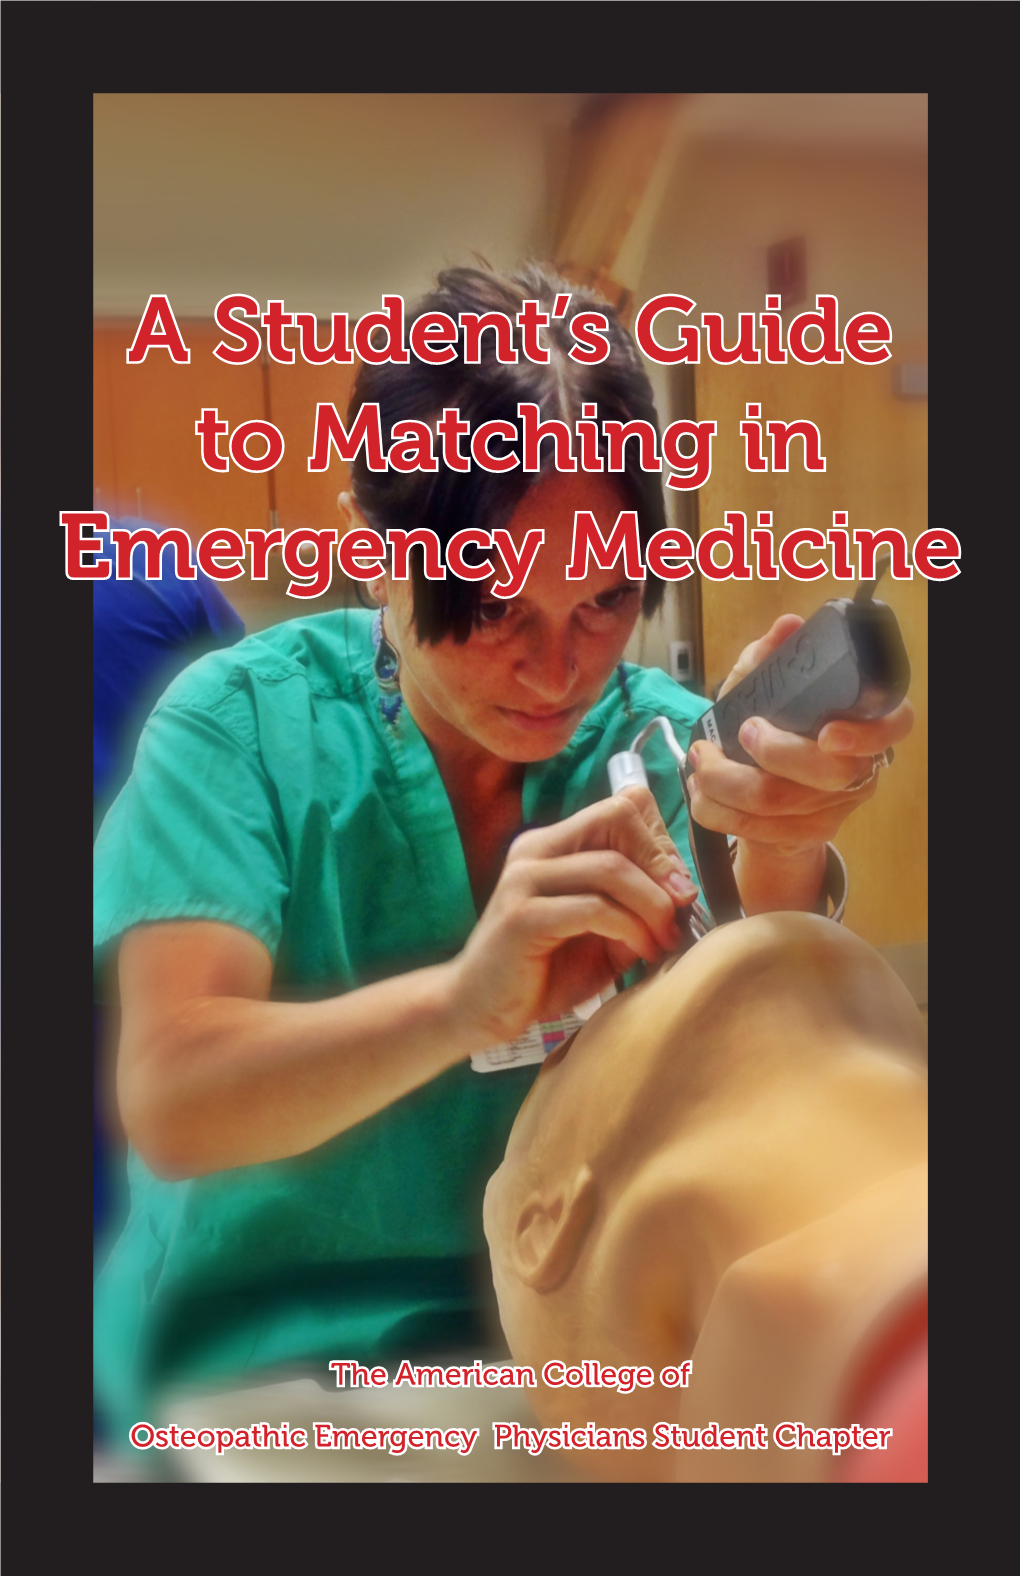 A Student's Guide to Matching in Emergency Medicine